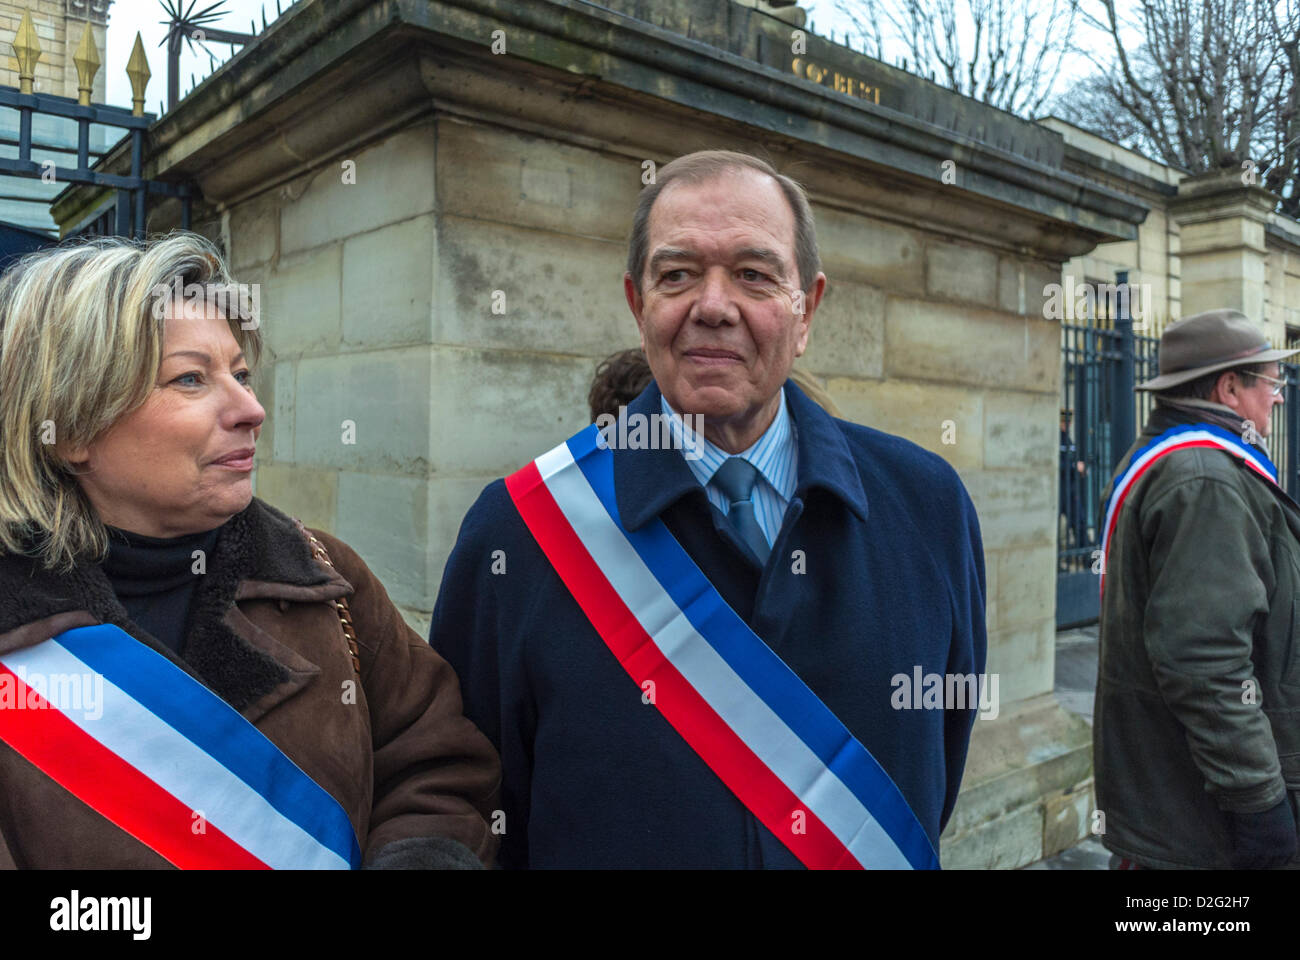 Paris, France, Politics, French Deputies March Against Gay Marriage Law, From National Assembly to Presidential Palace, to deliver letter to President Hol-lande, Patrick Ollier, Stock Photo